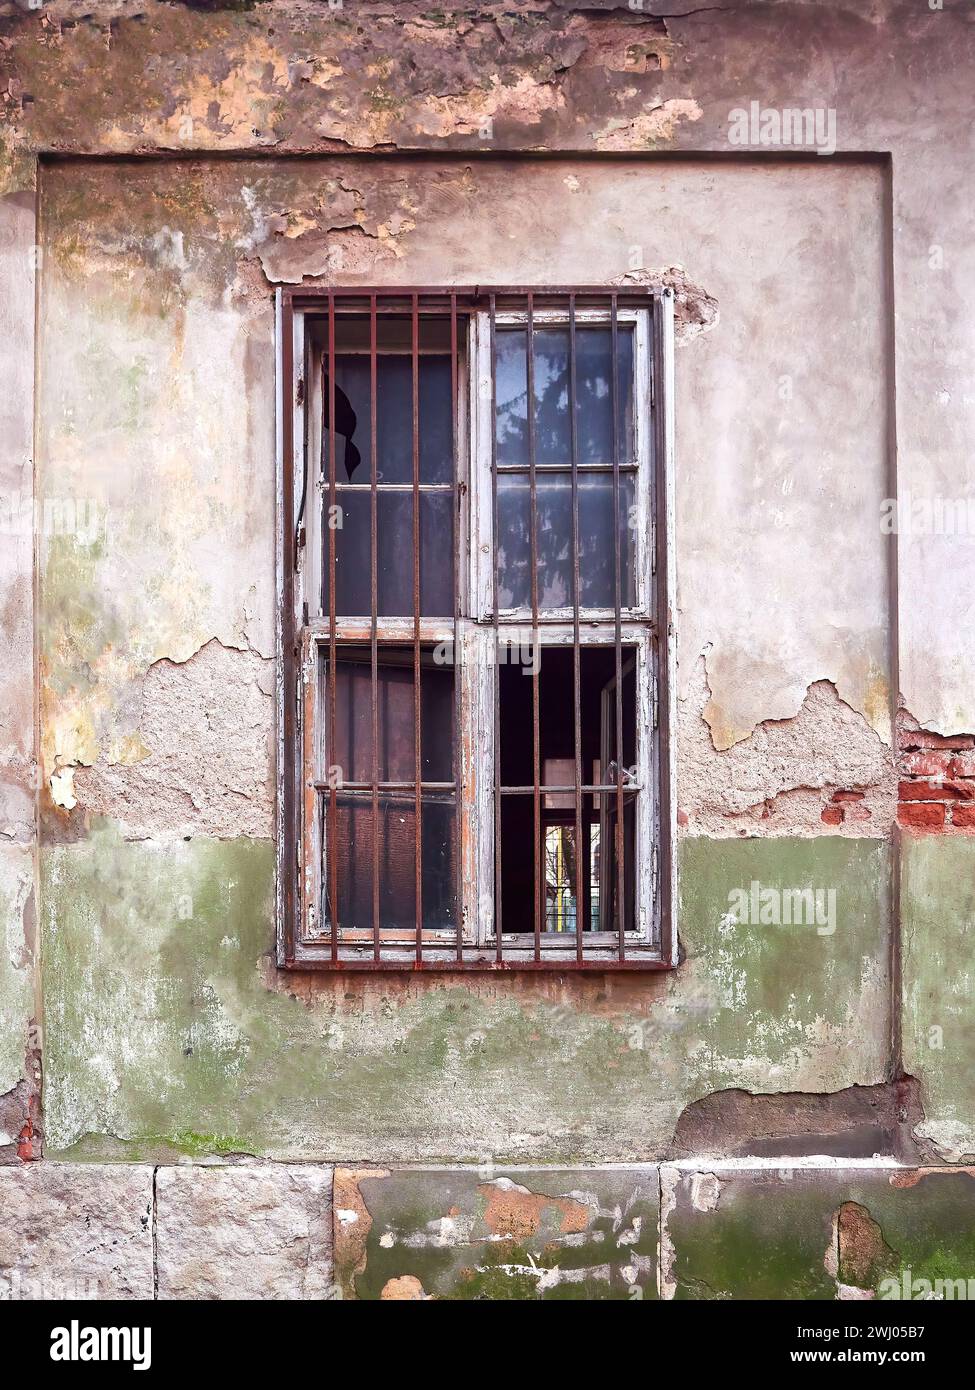 Old narrow window with a metal decorative grille on building. Old plastered wall with window Stock Photo